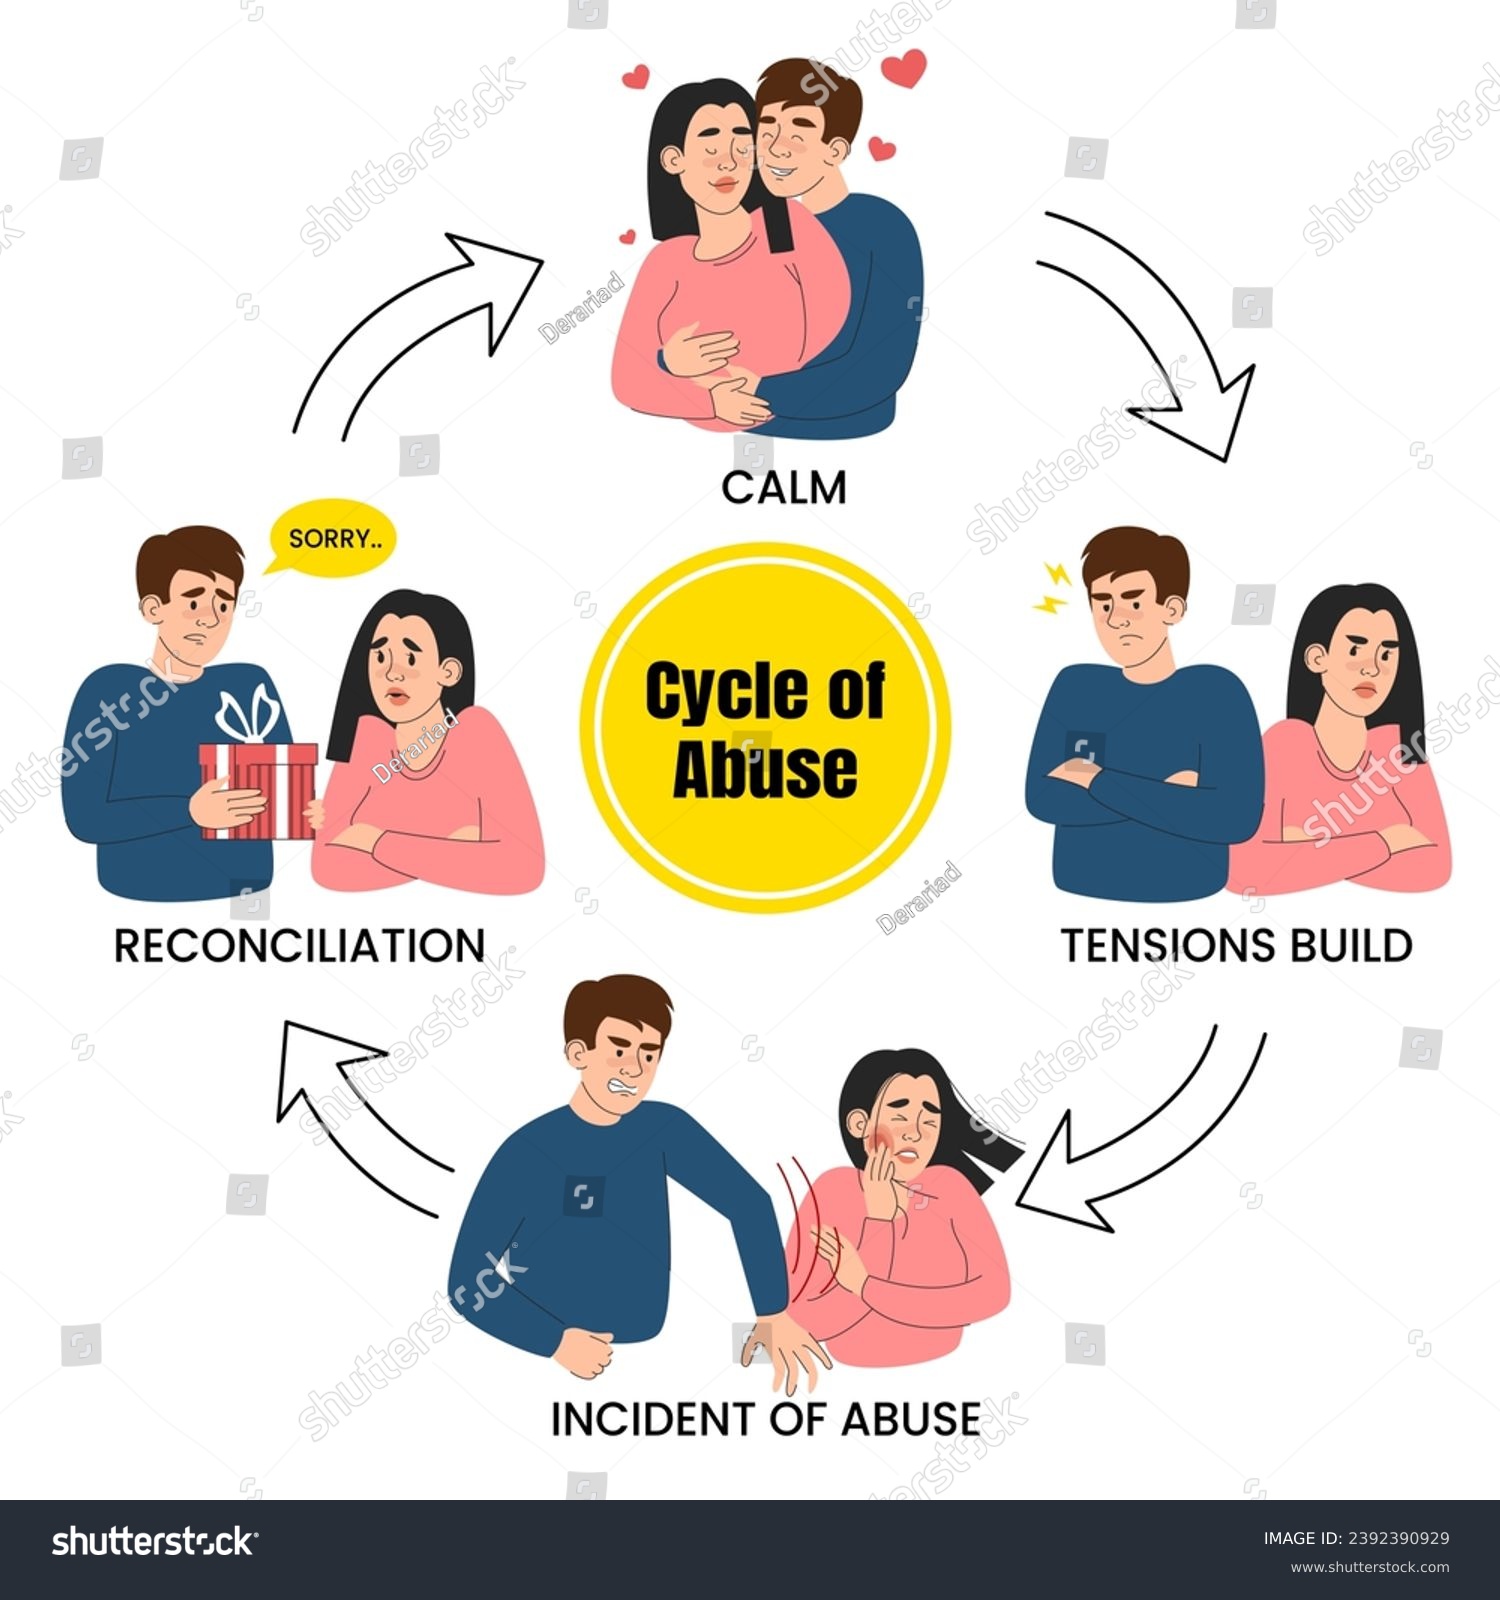 Scheme of cycle of abuse in relationship vector isolated. 4 stages of the cycle, tensions build, abuse, reconciliation and calm. Woman fears her husband. Domestic violence awareness. #2392390929